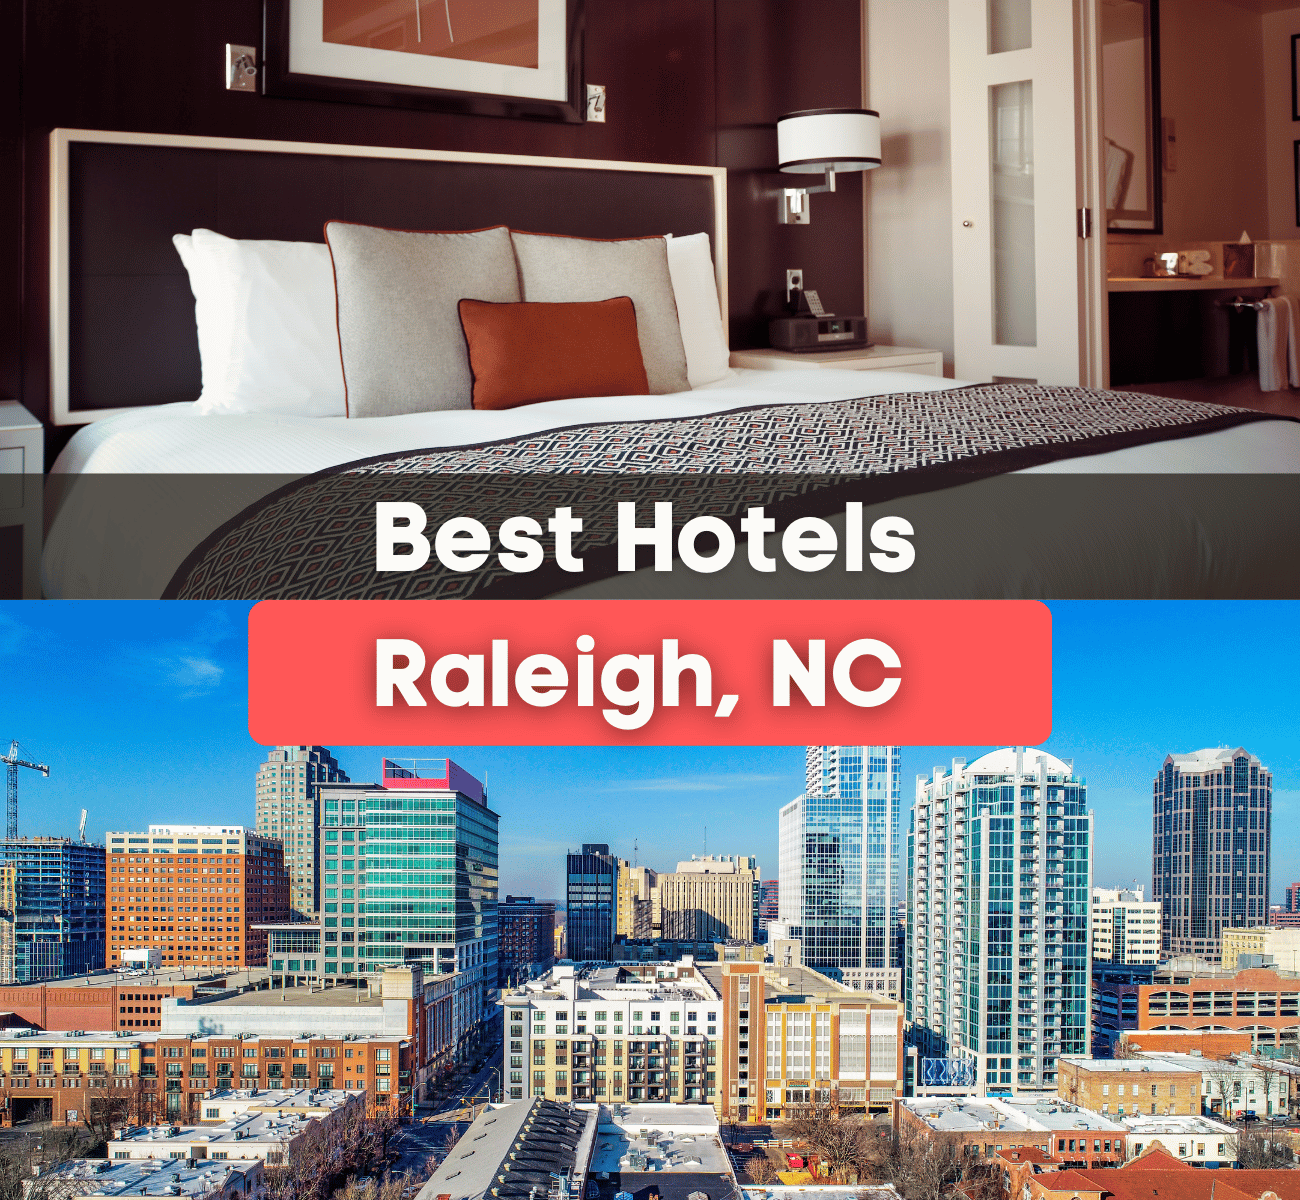 13 Best Hotels In Raleigh, NC (Based on Value)